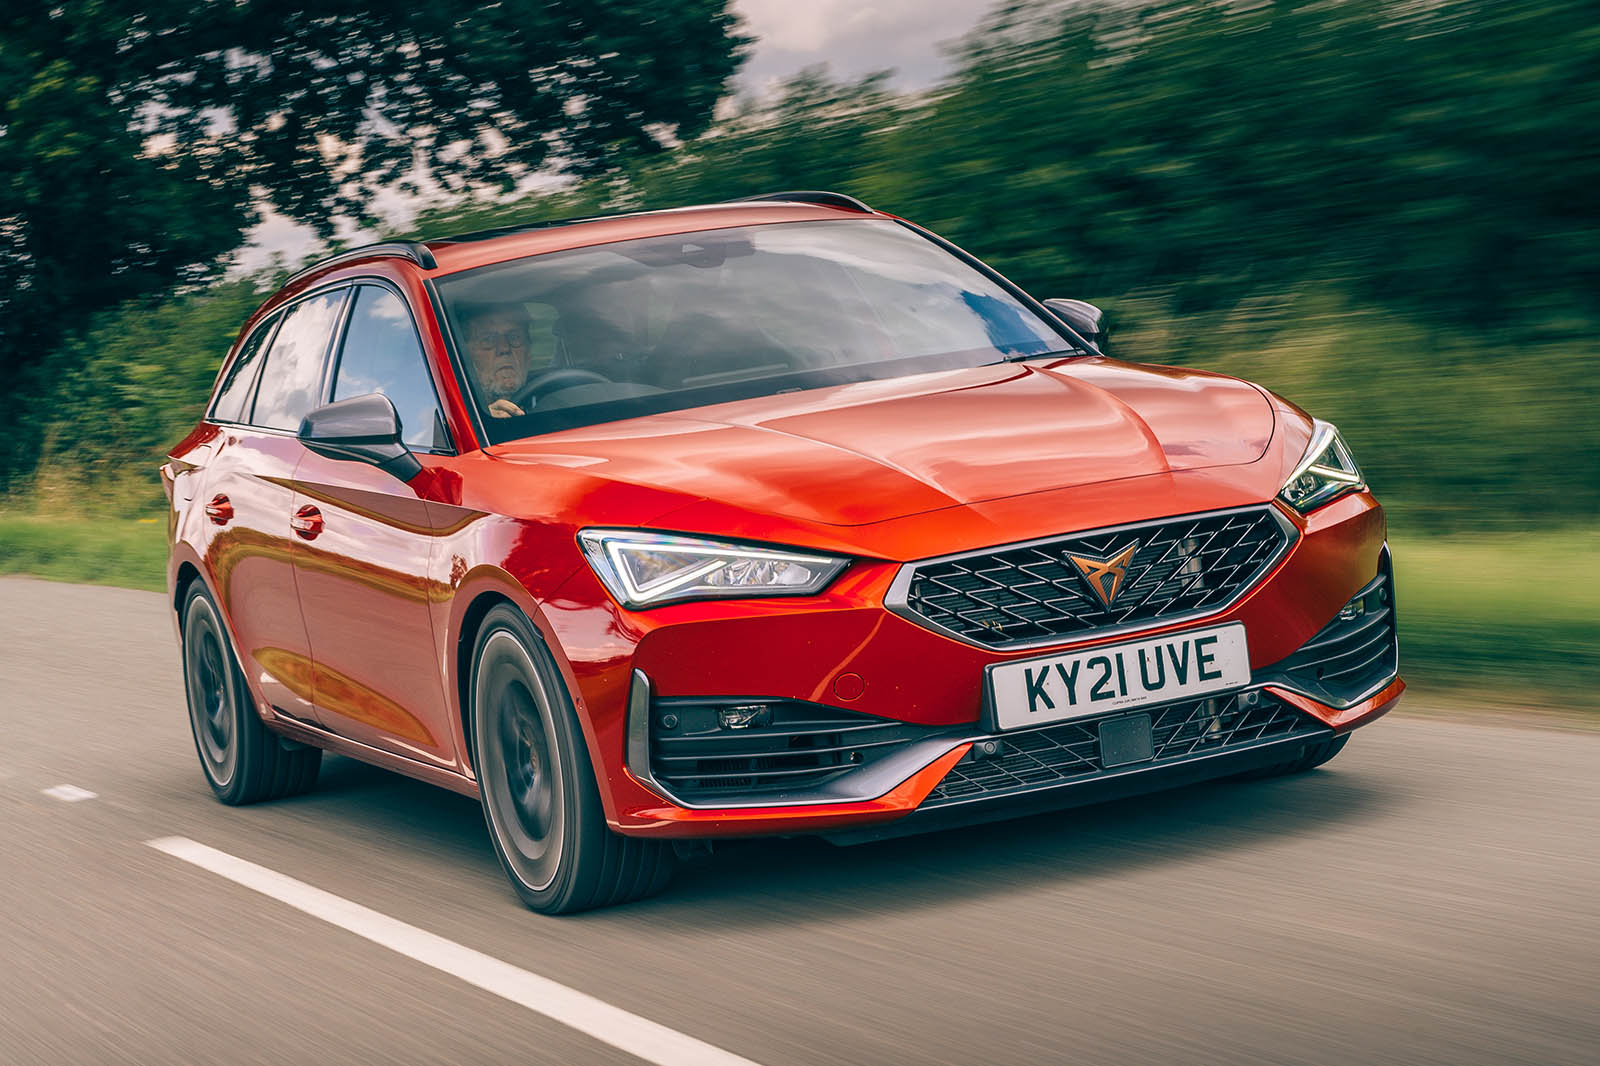 Updated 2024 Cupra Formentor and Cupra Leon get all-new look